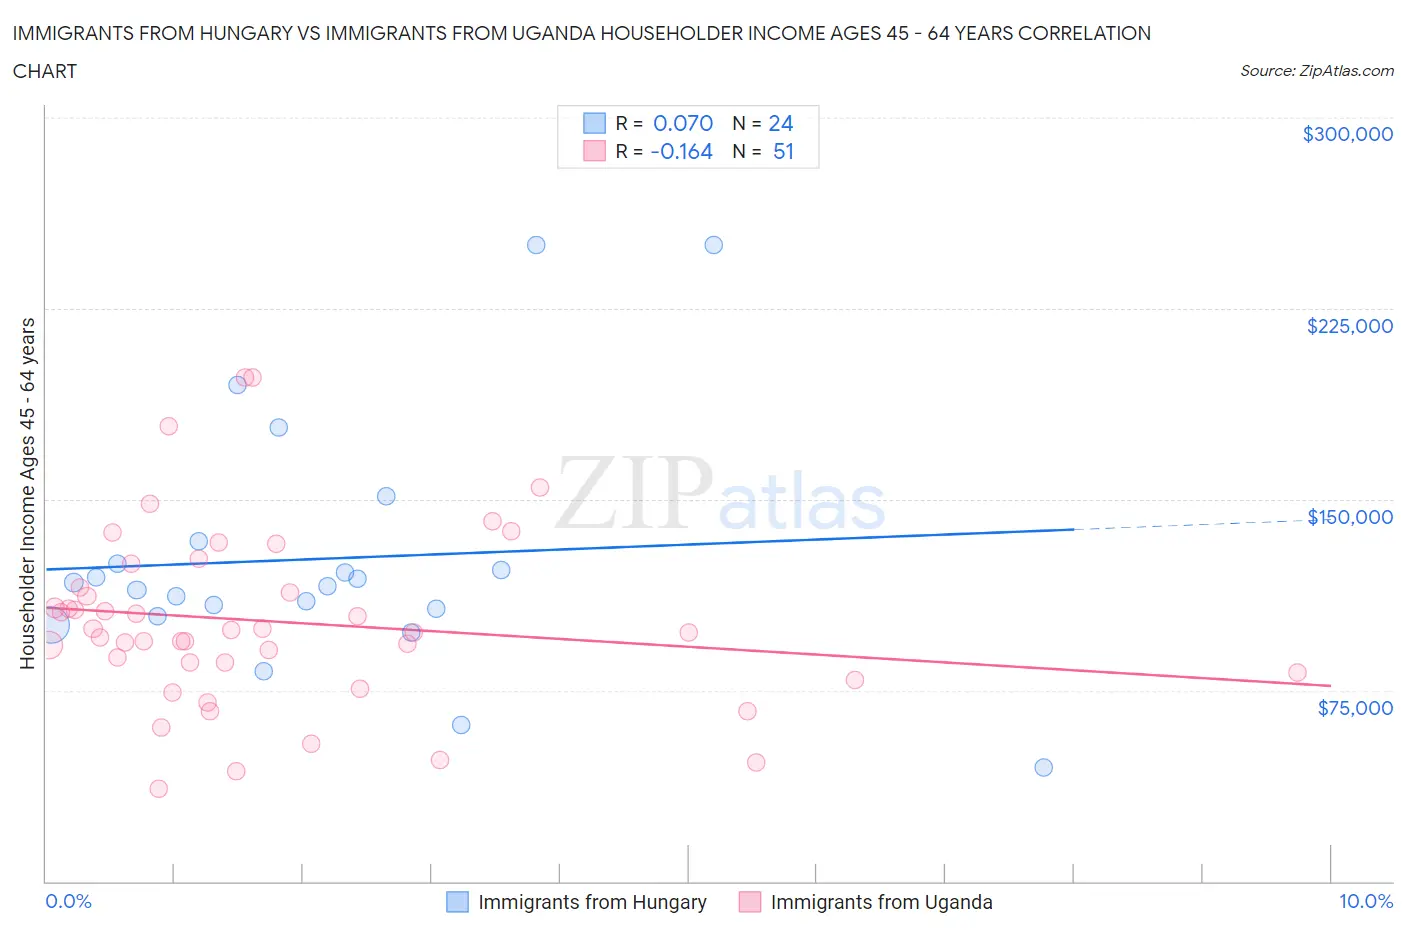 Immigrants from Hungary vs Immigrants from Uganda Householder Income Ages 45 - 64 years